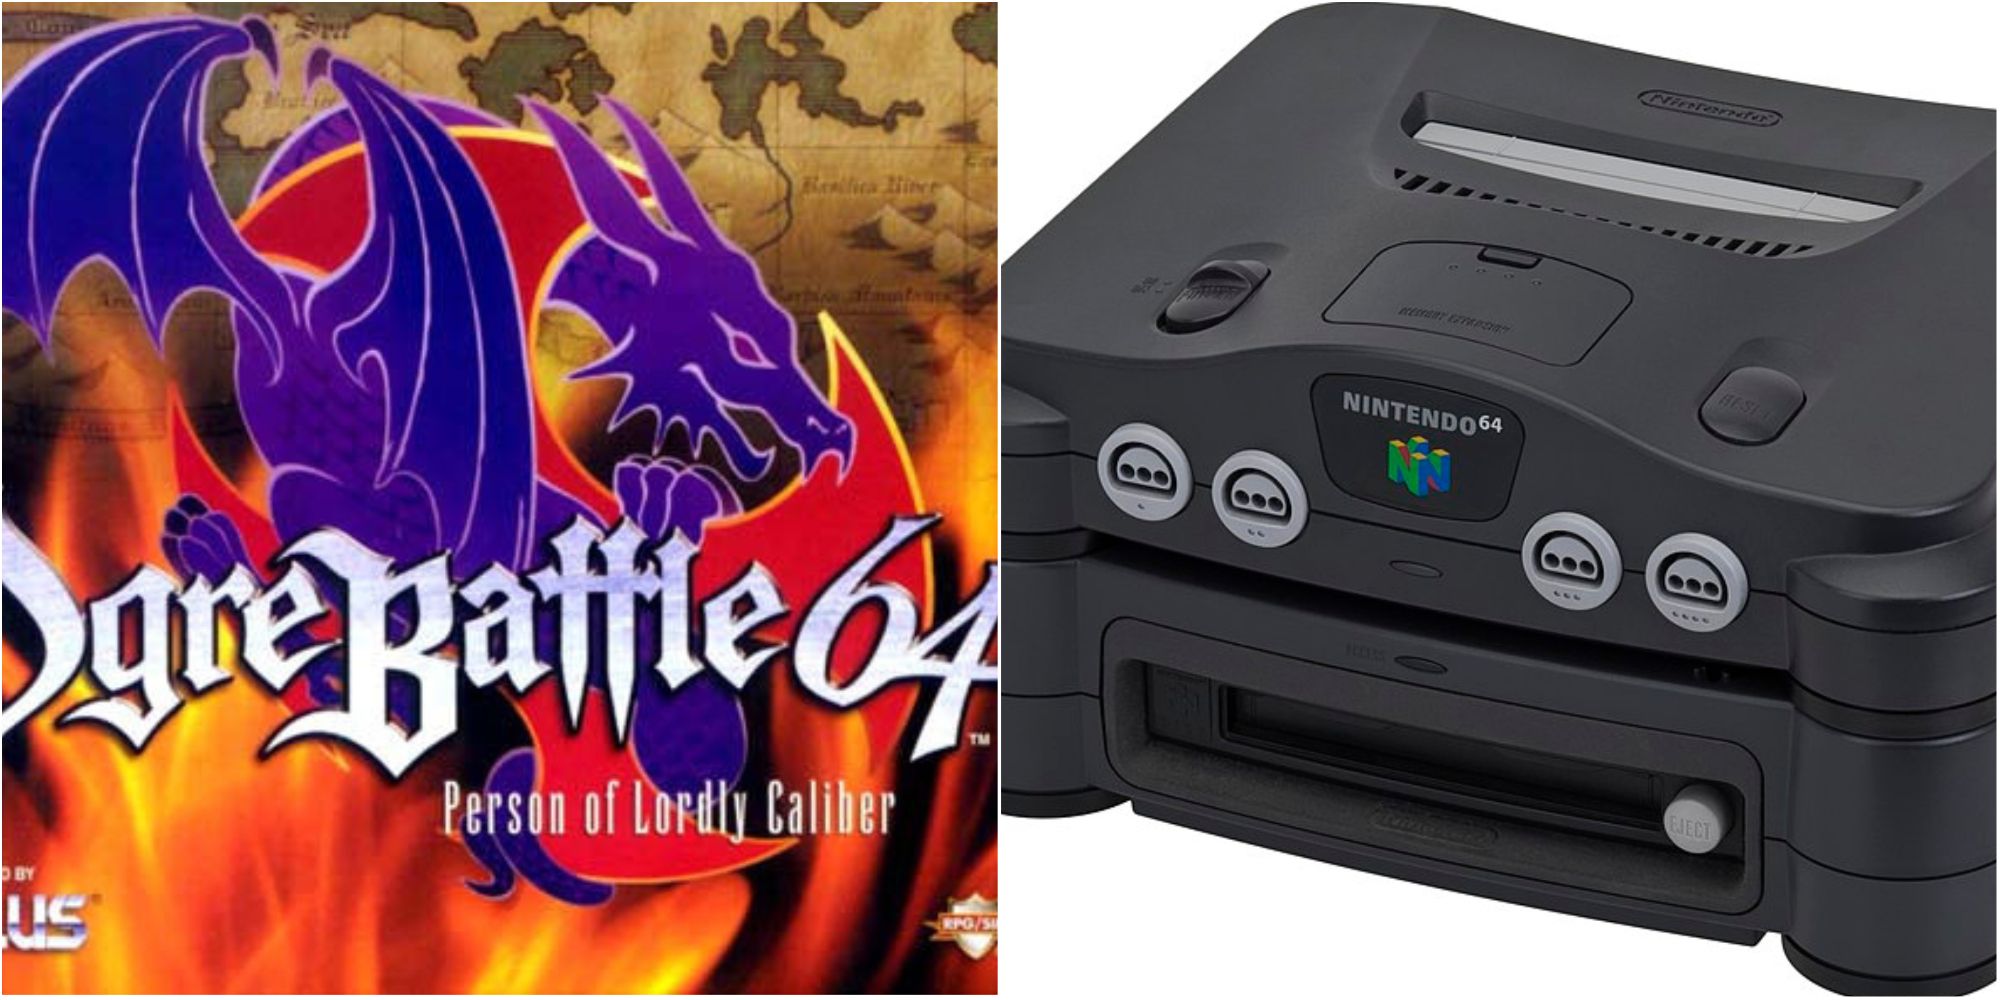 ogre battle 64 and 64dd